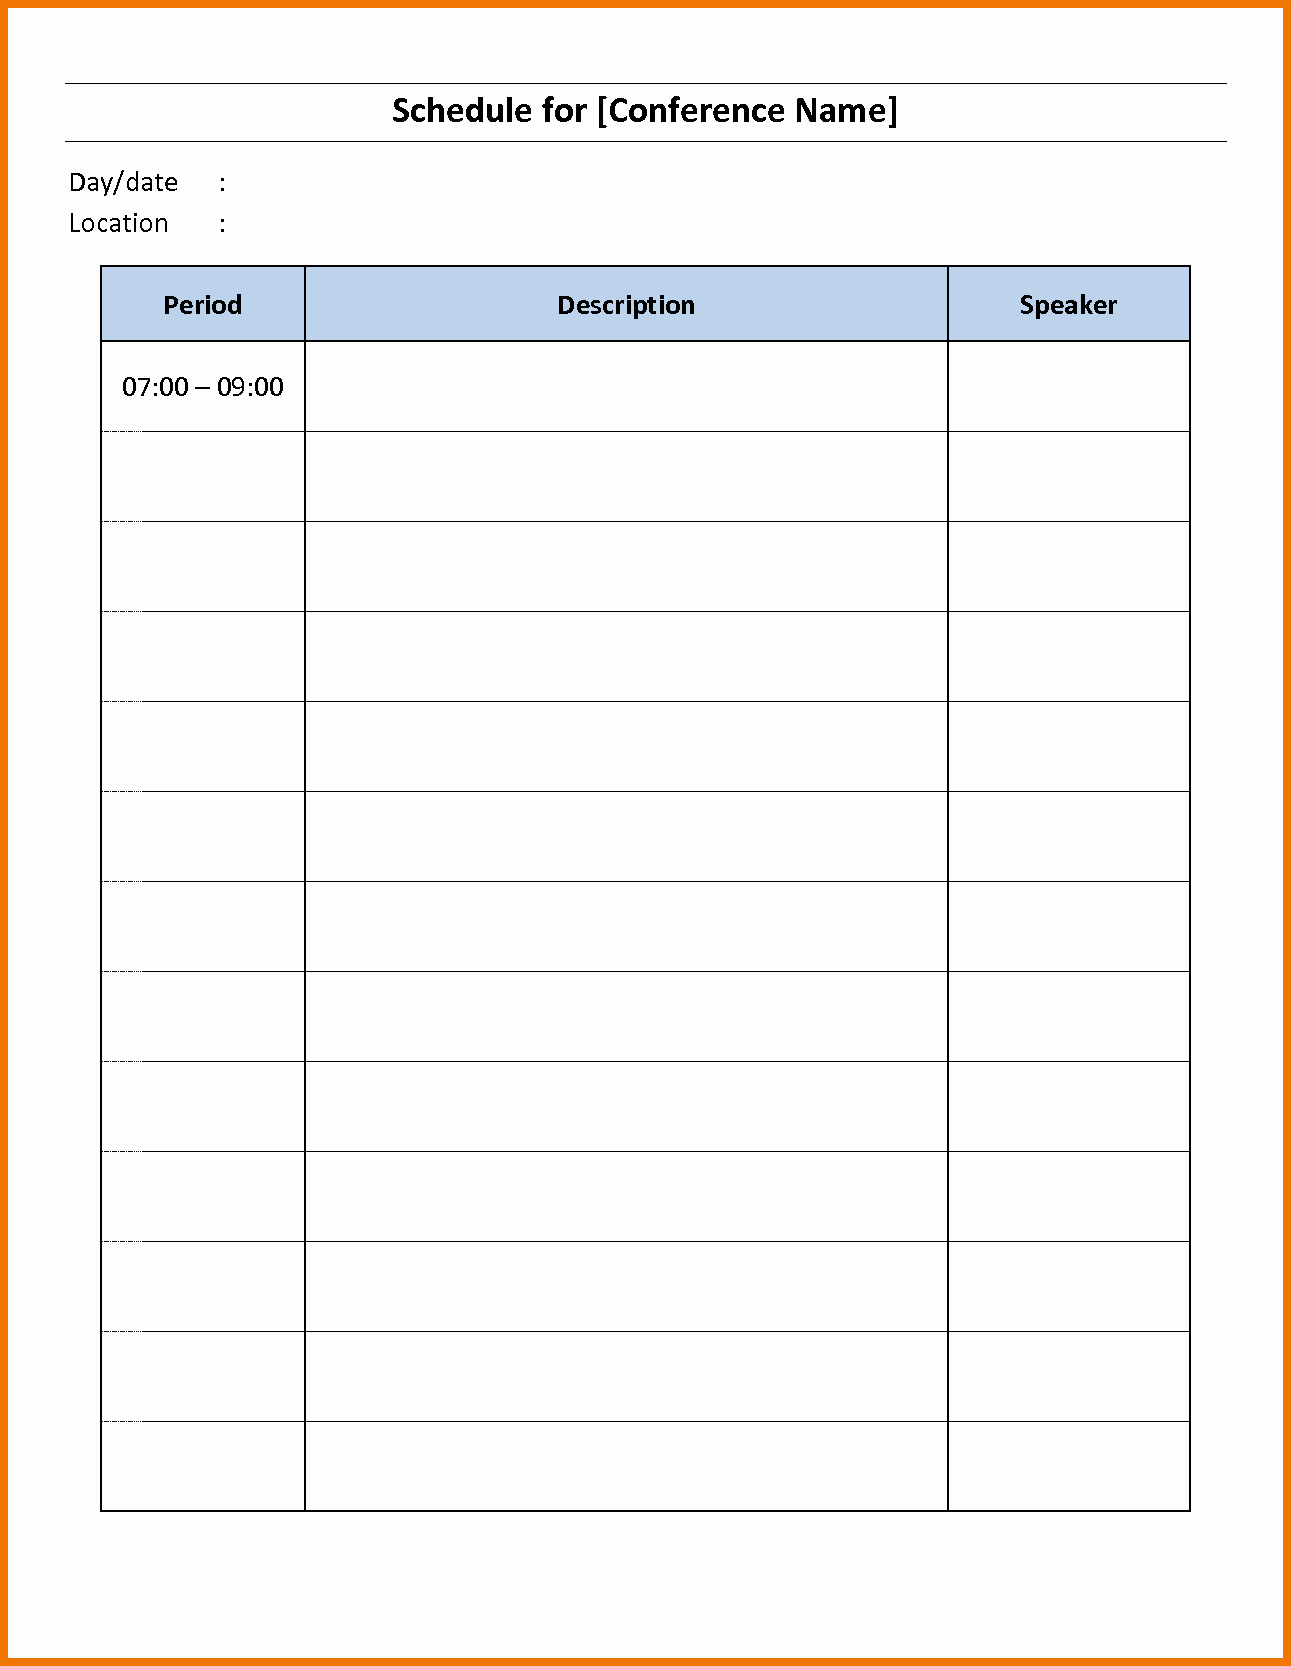 Daily Schedule Template Free Best Of Daily Itinerary Free Download Elsevier social Sciences